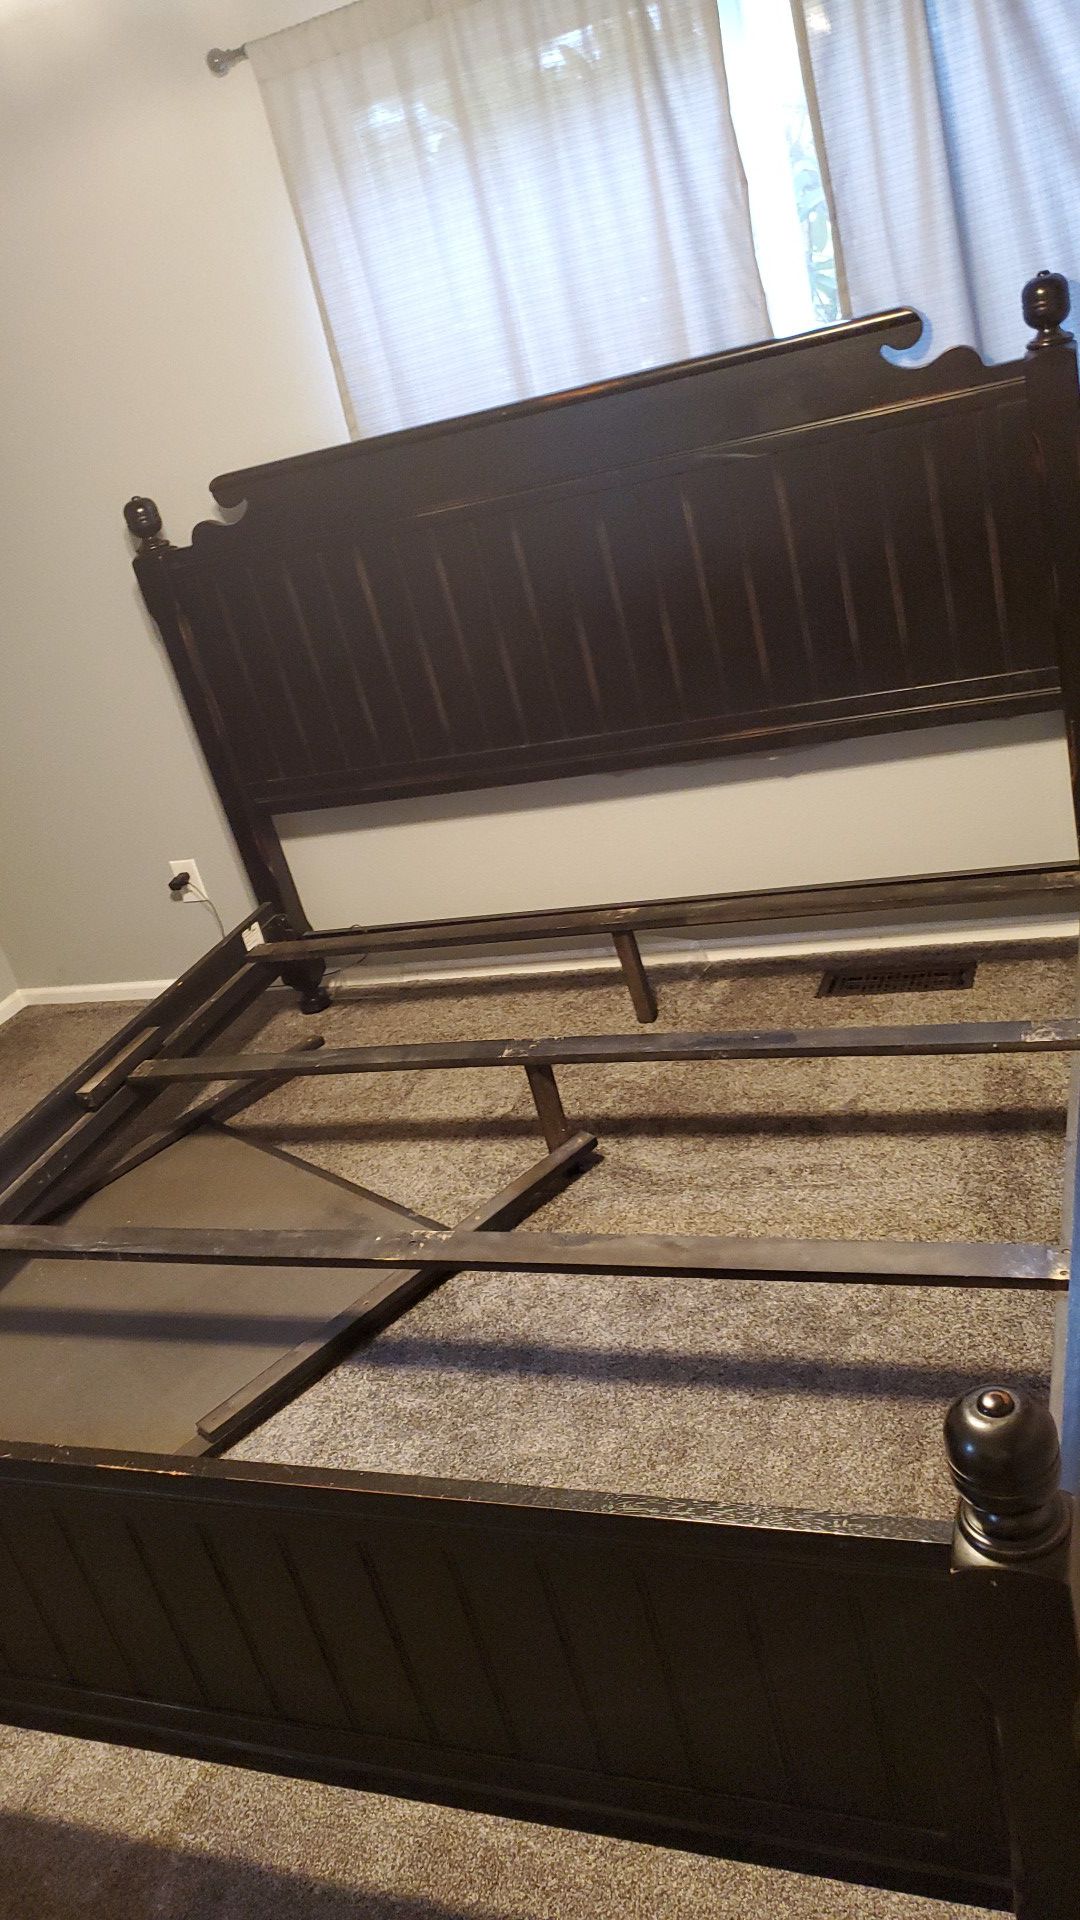 King bed frame and dresser with one matching night stand and mirror for dresser